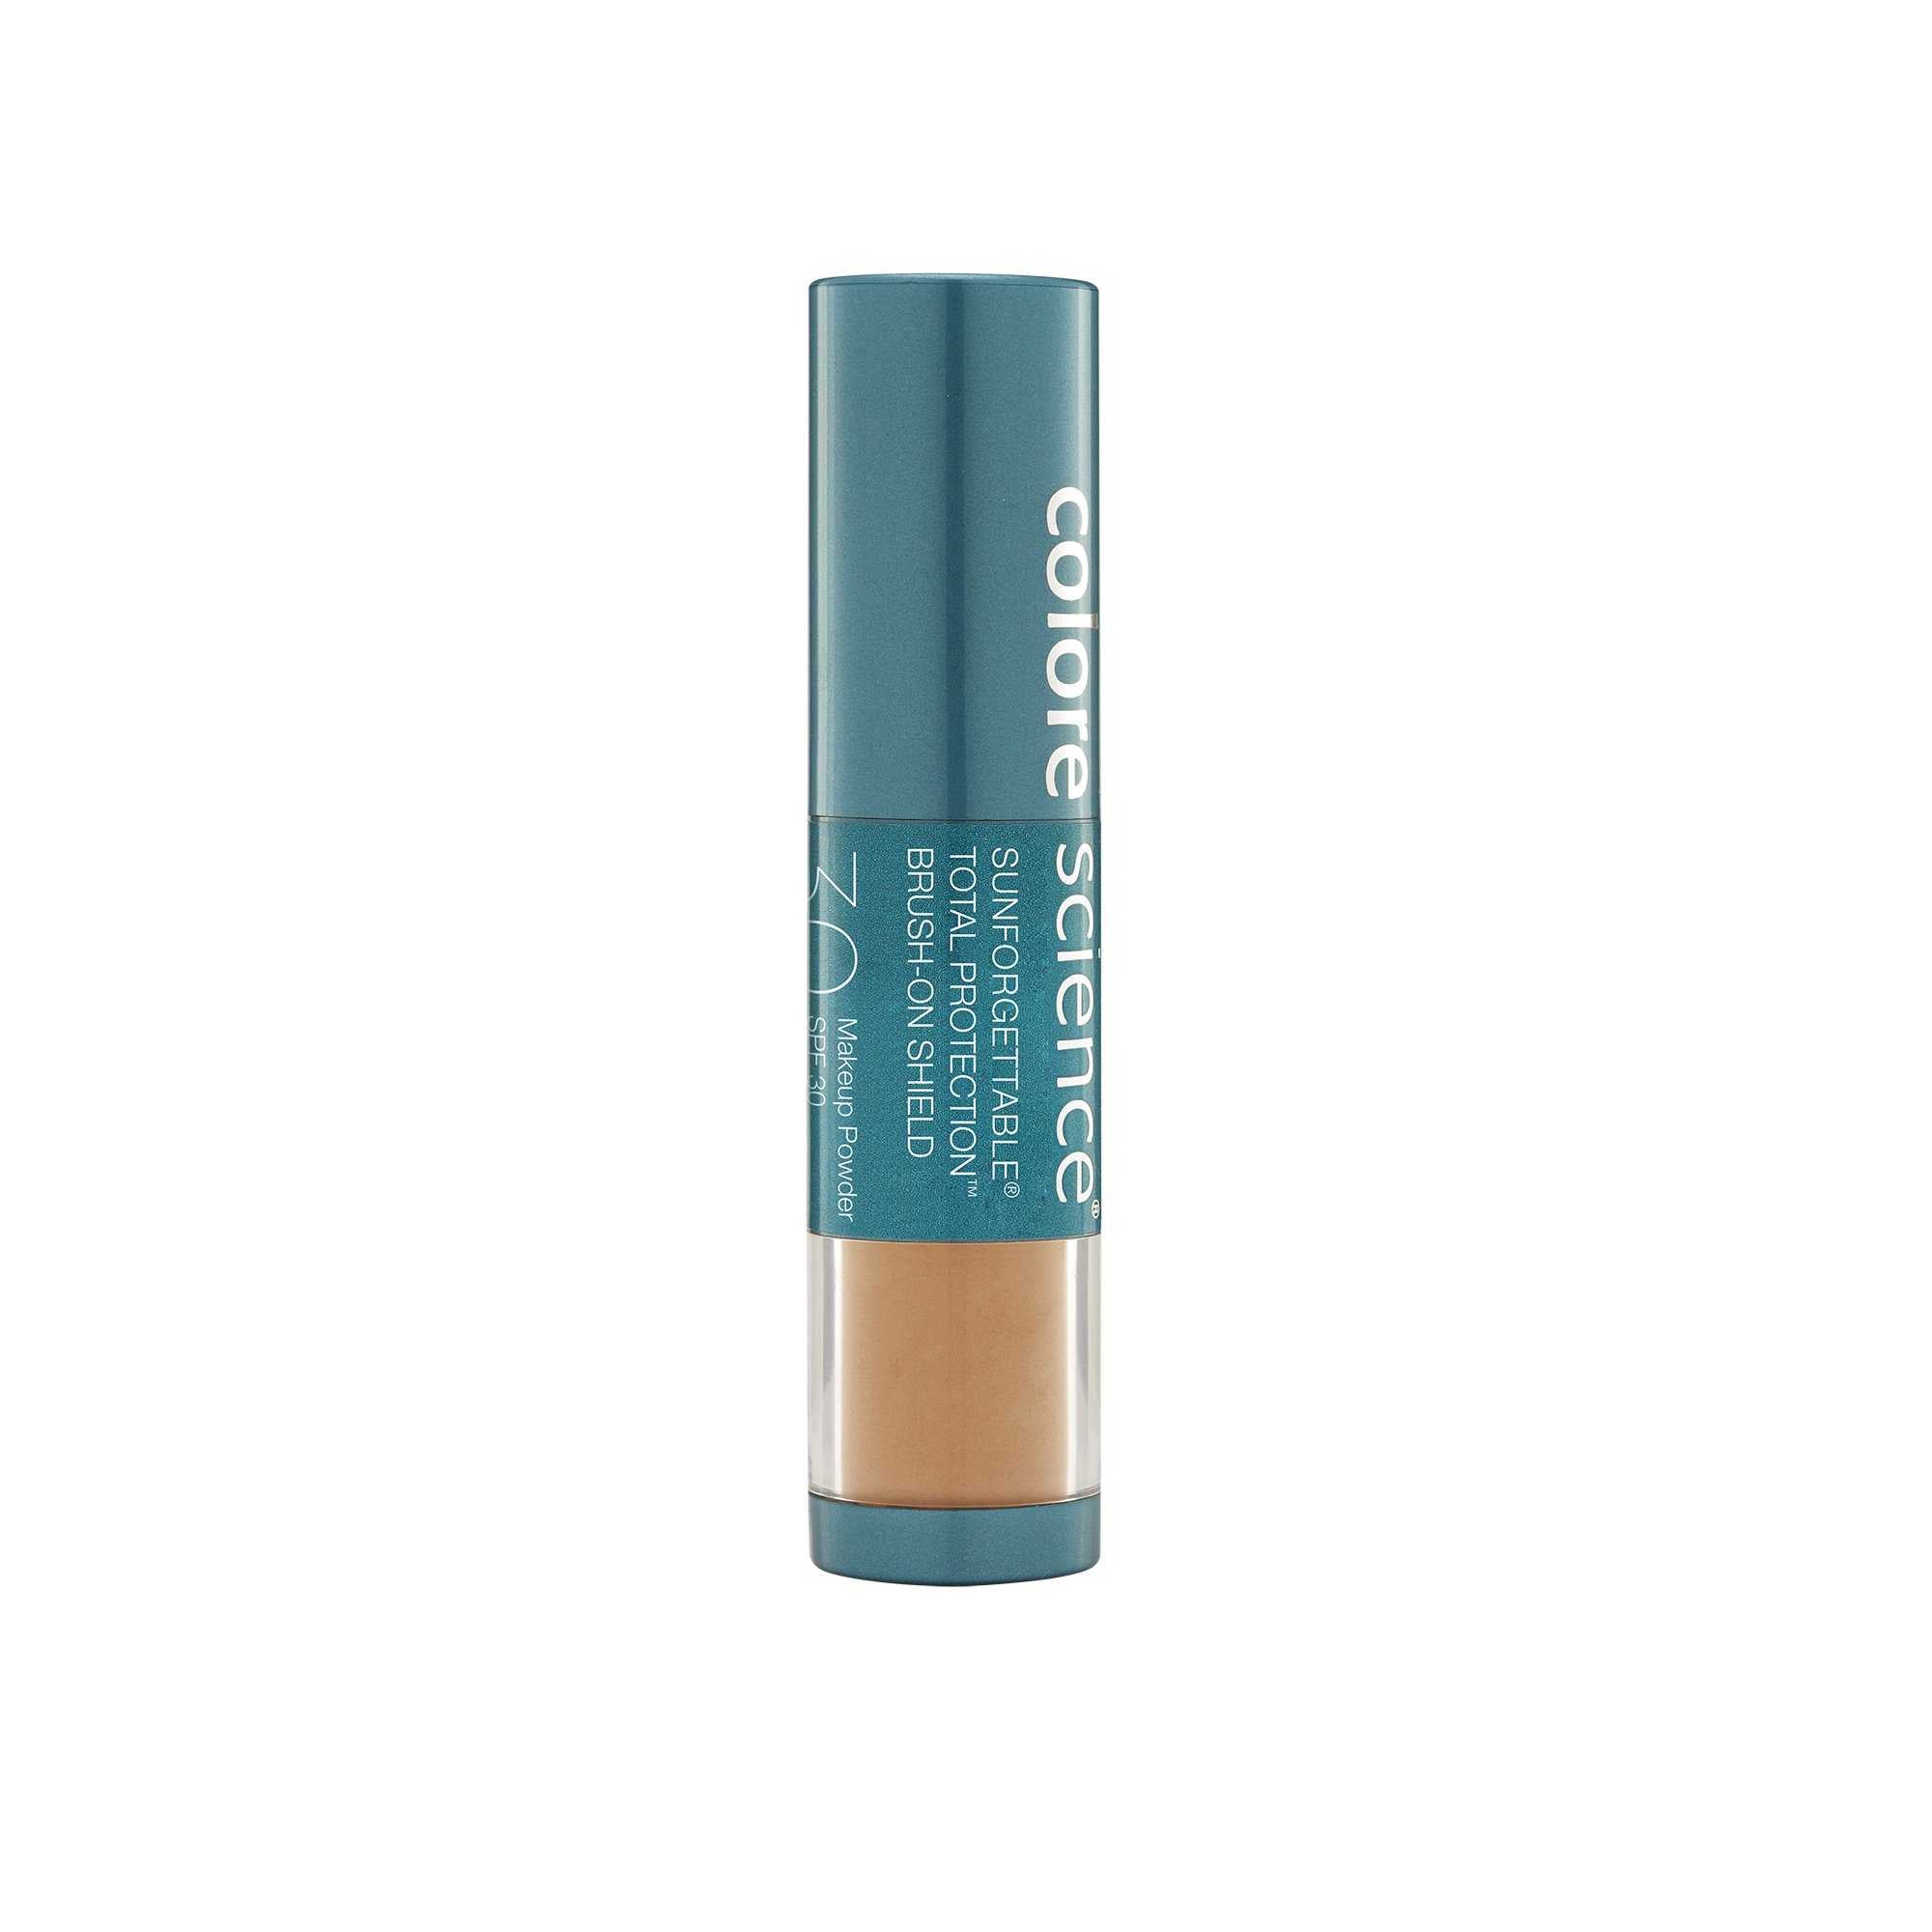 Colorescience Sunforgettable Total Protection Brush SPF30 - Tan 6g